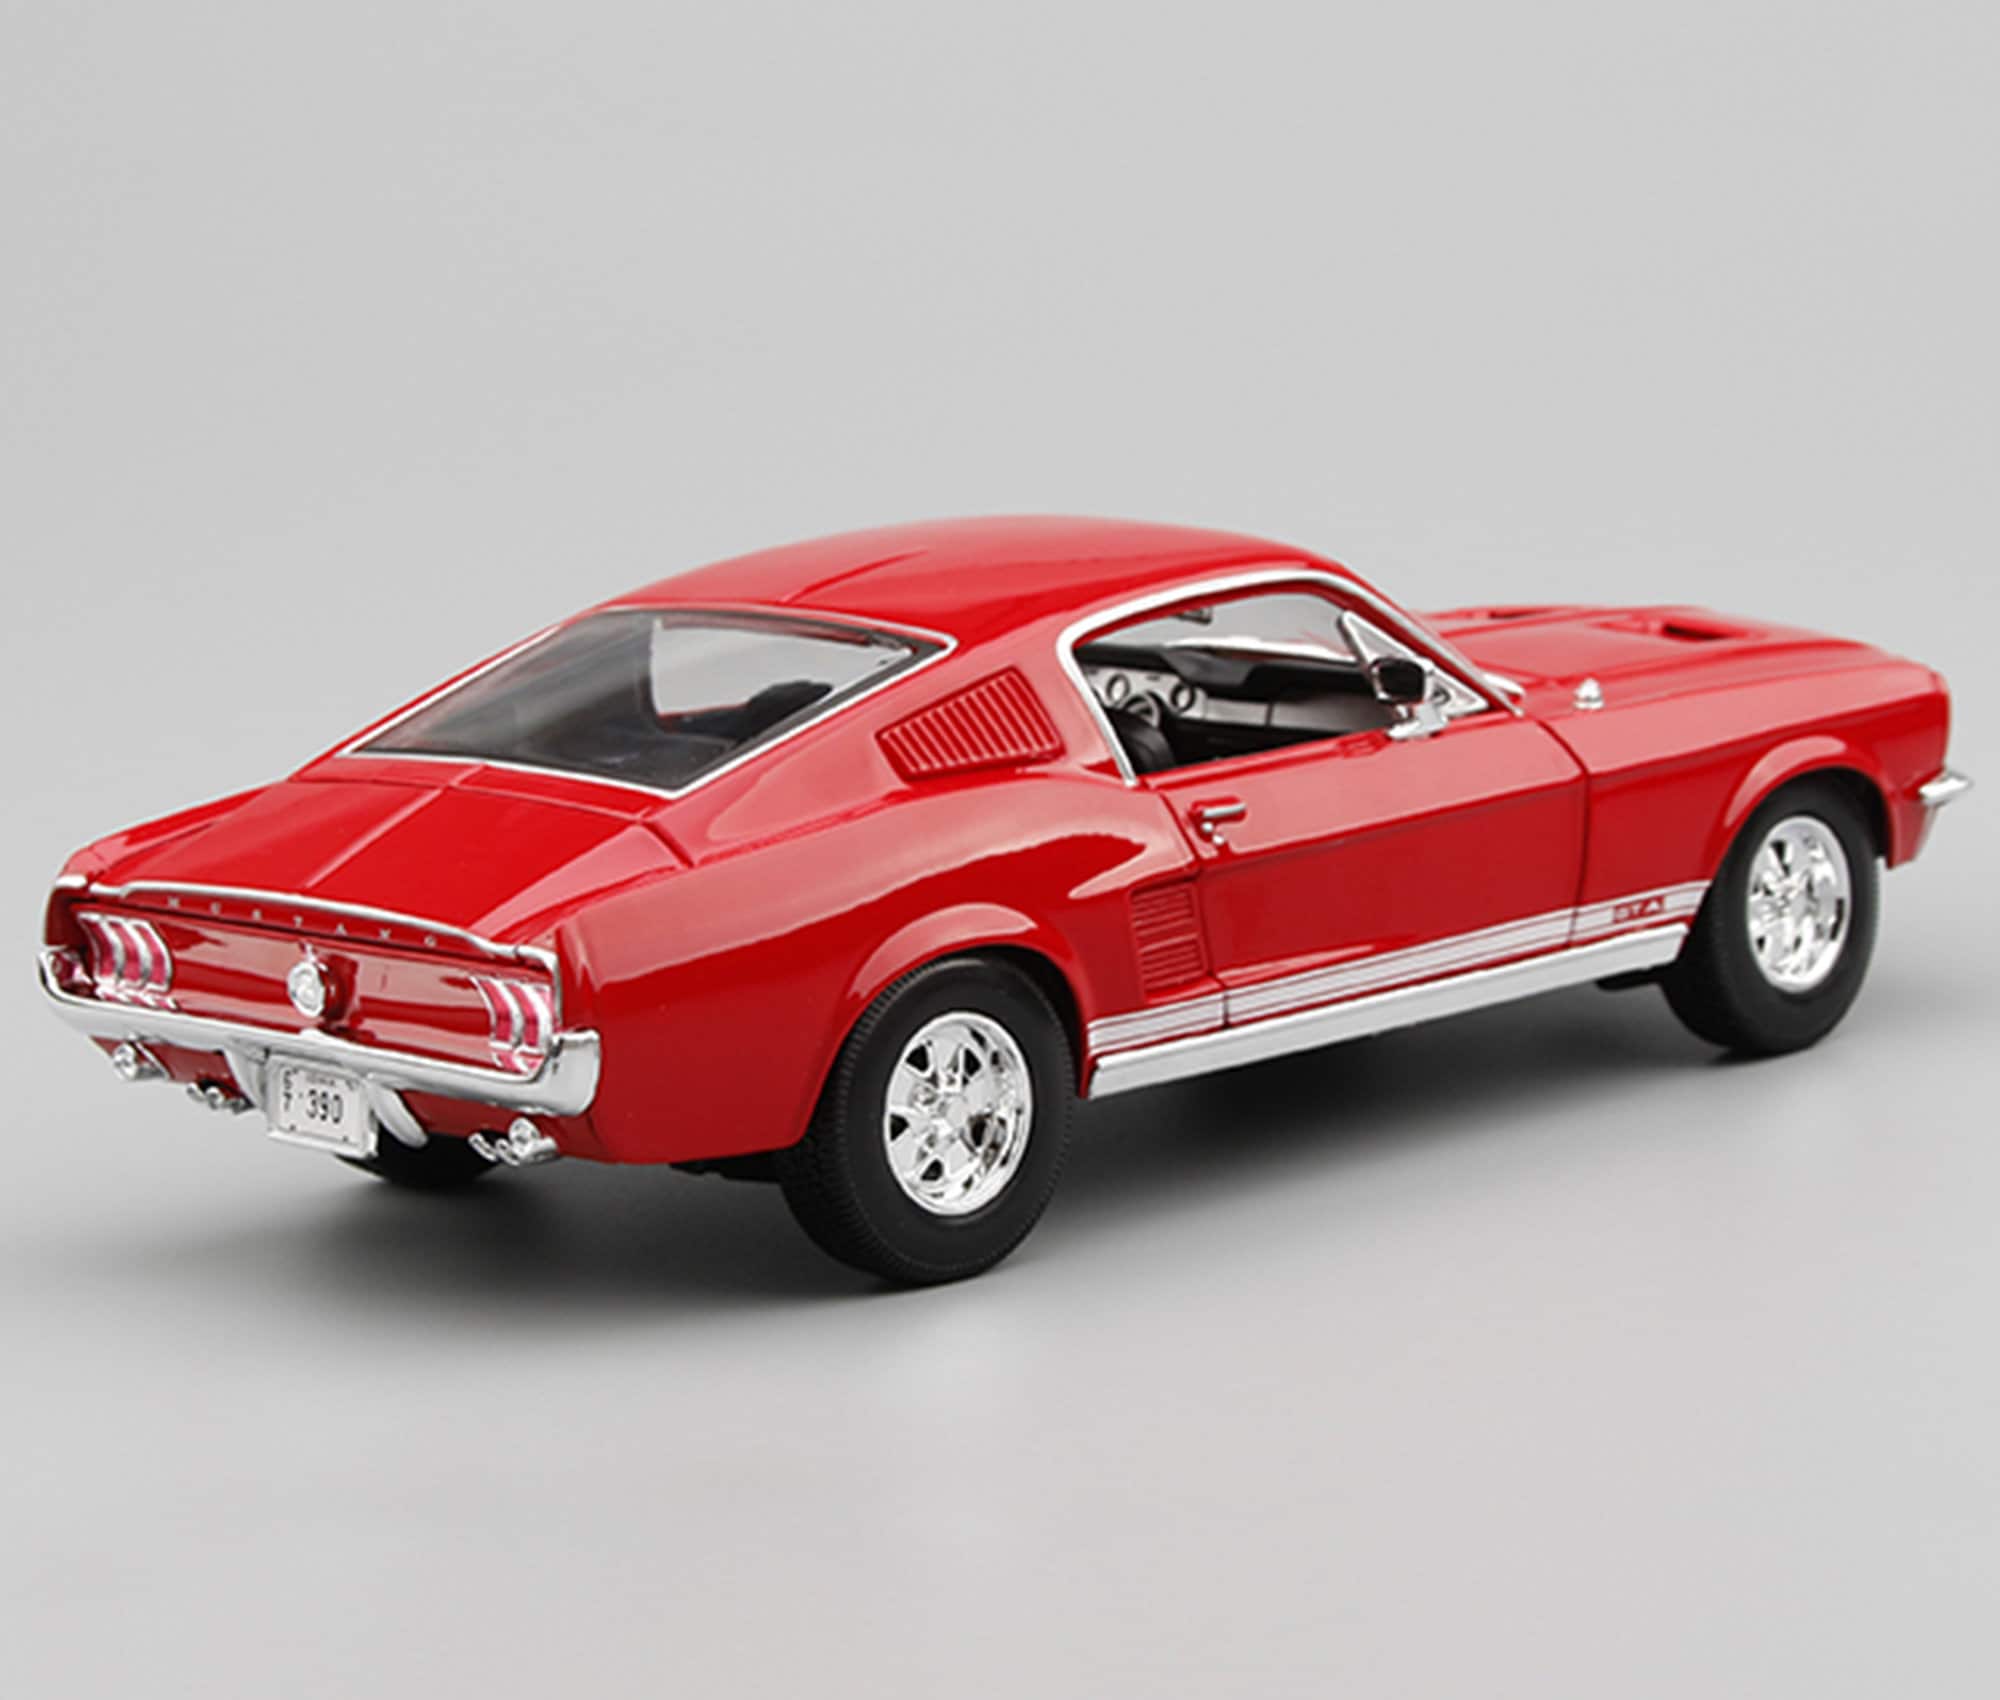 Maquette voiture Ford Mustang Fastback verte 1967 1:18 - maquette